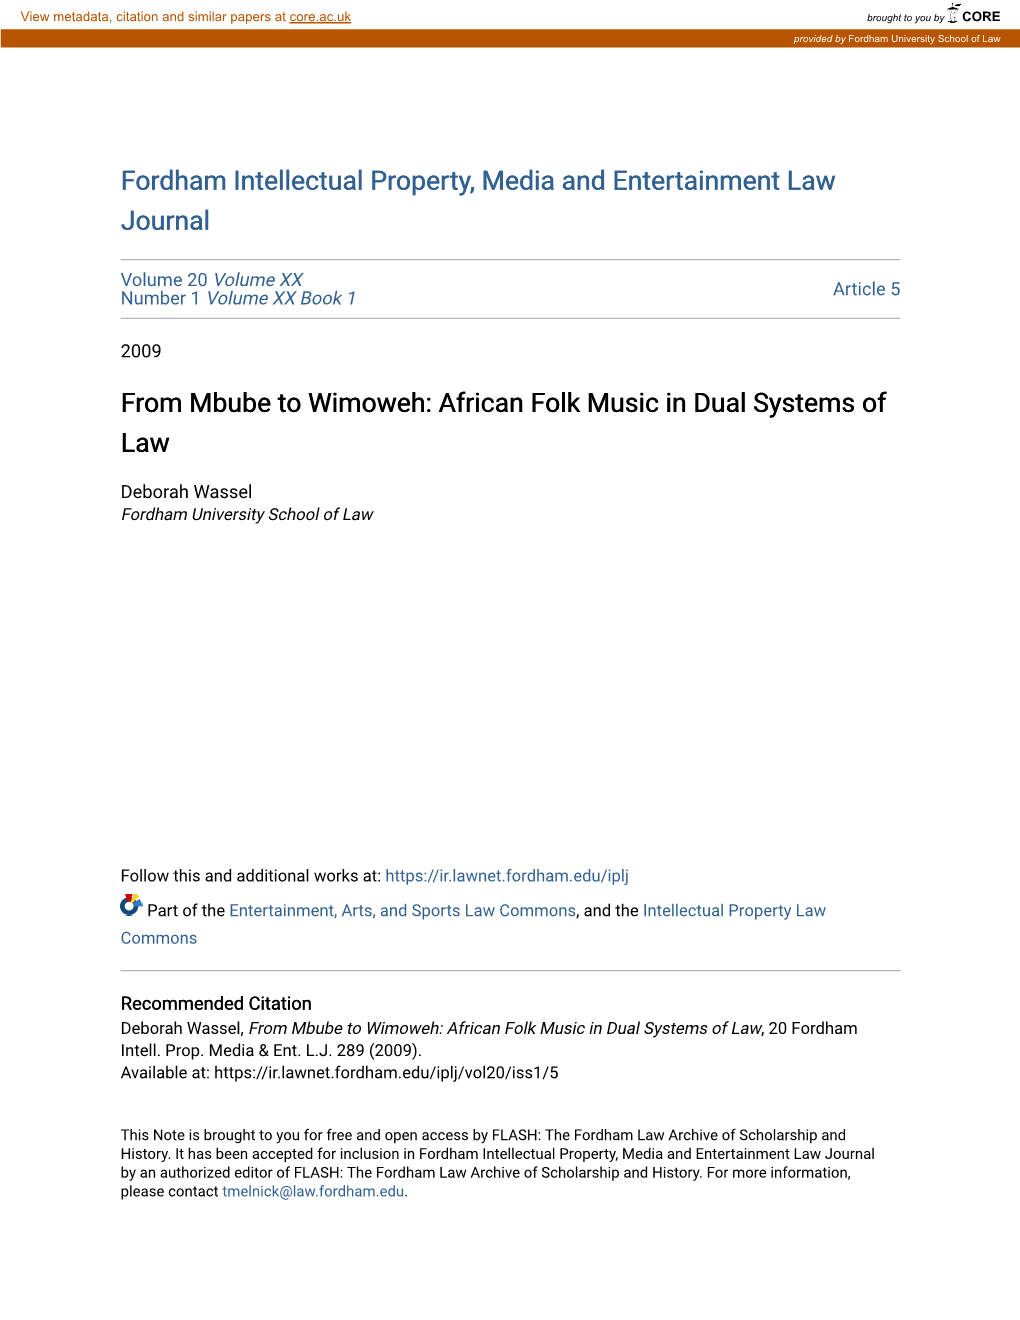 From Mbube to Wimoweh: African Folk Music in Dual Systems of Law